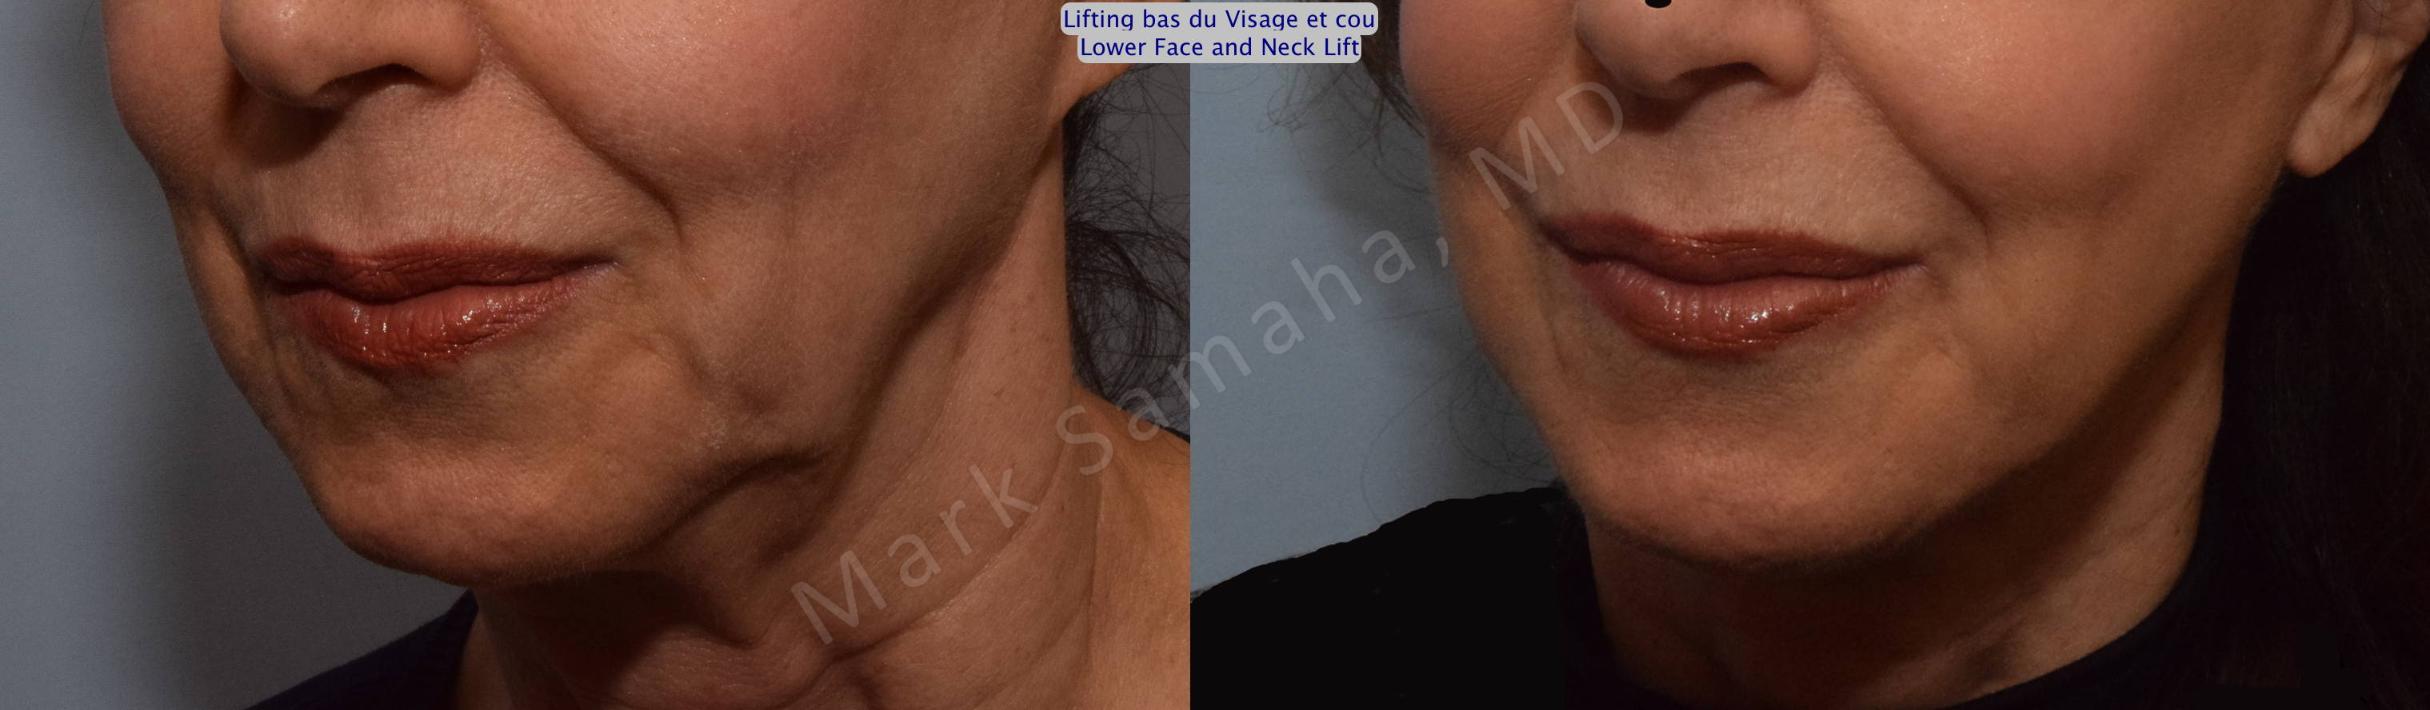 Before & After Lifting du visage / Cou - Facelift / Necklift Case 101 View #5 View in Mount Royal, QC